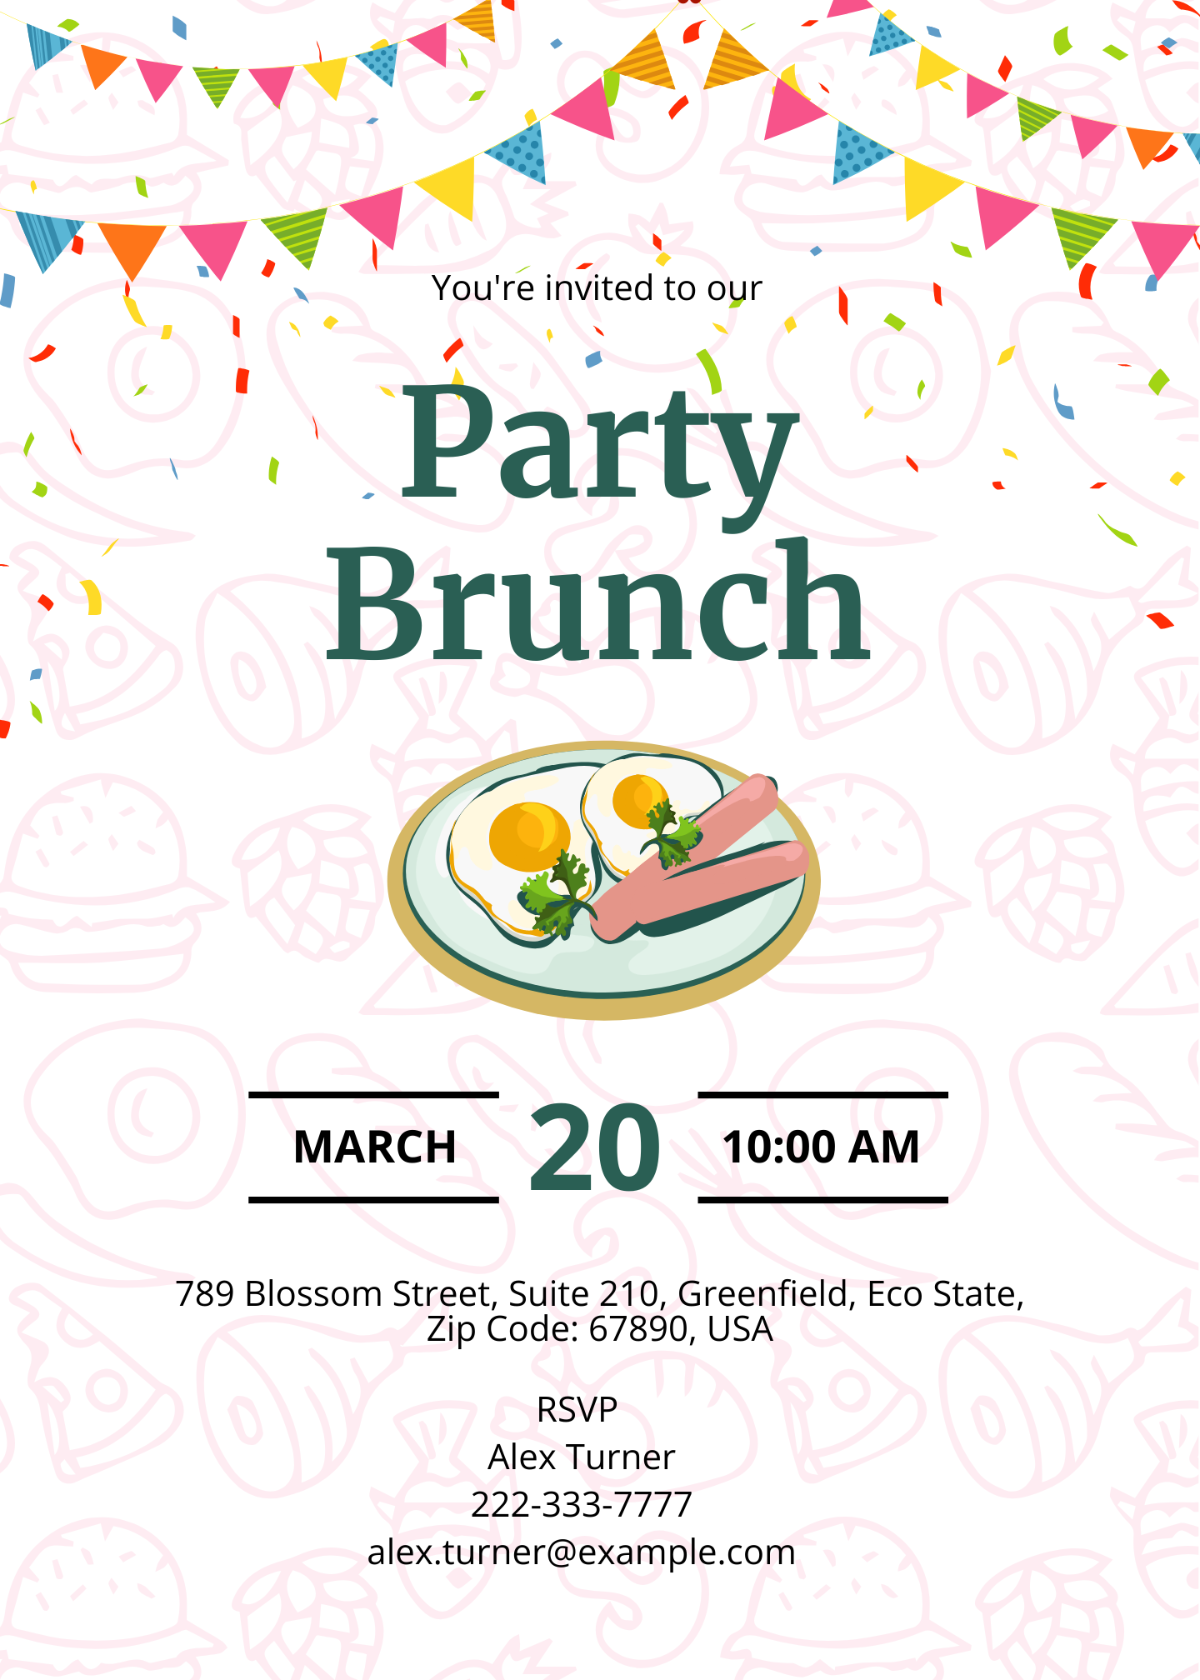 Party Brunch Invitation